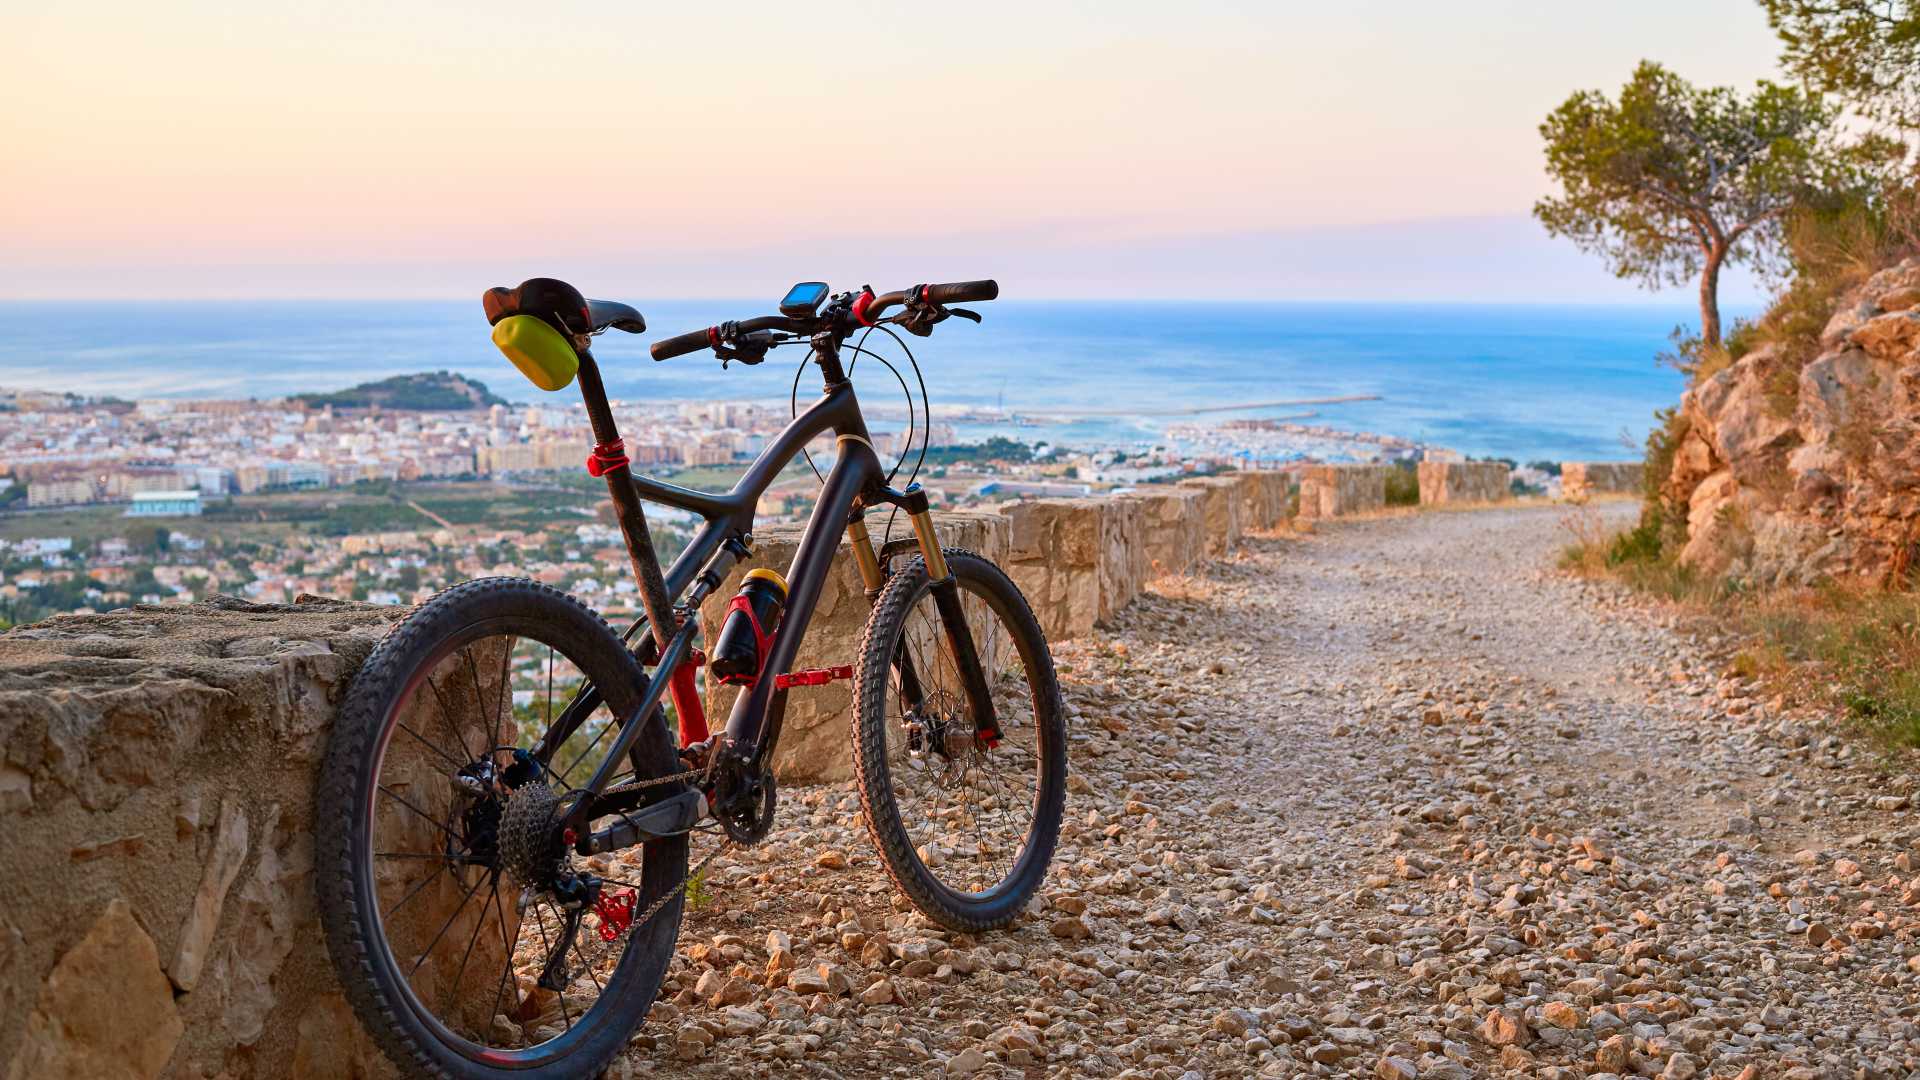 Cycling, mountain biking and bicycle touring in the Region of Valencia